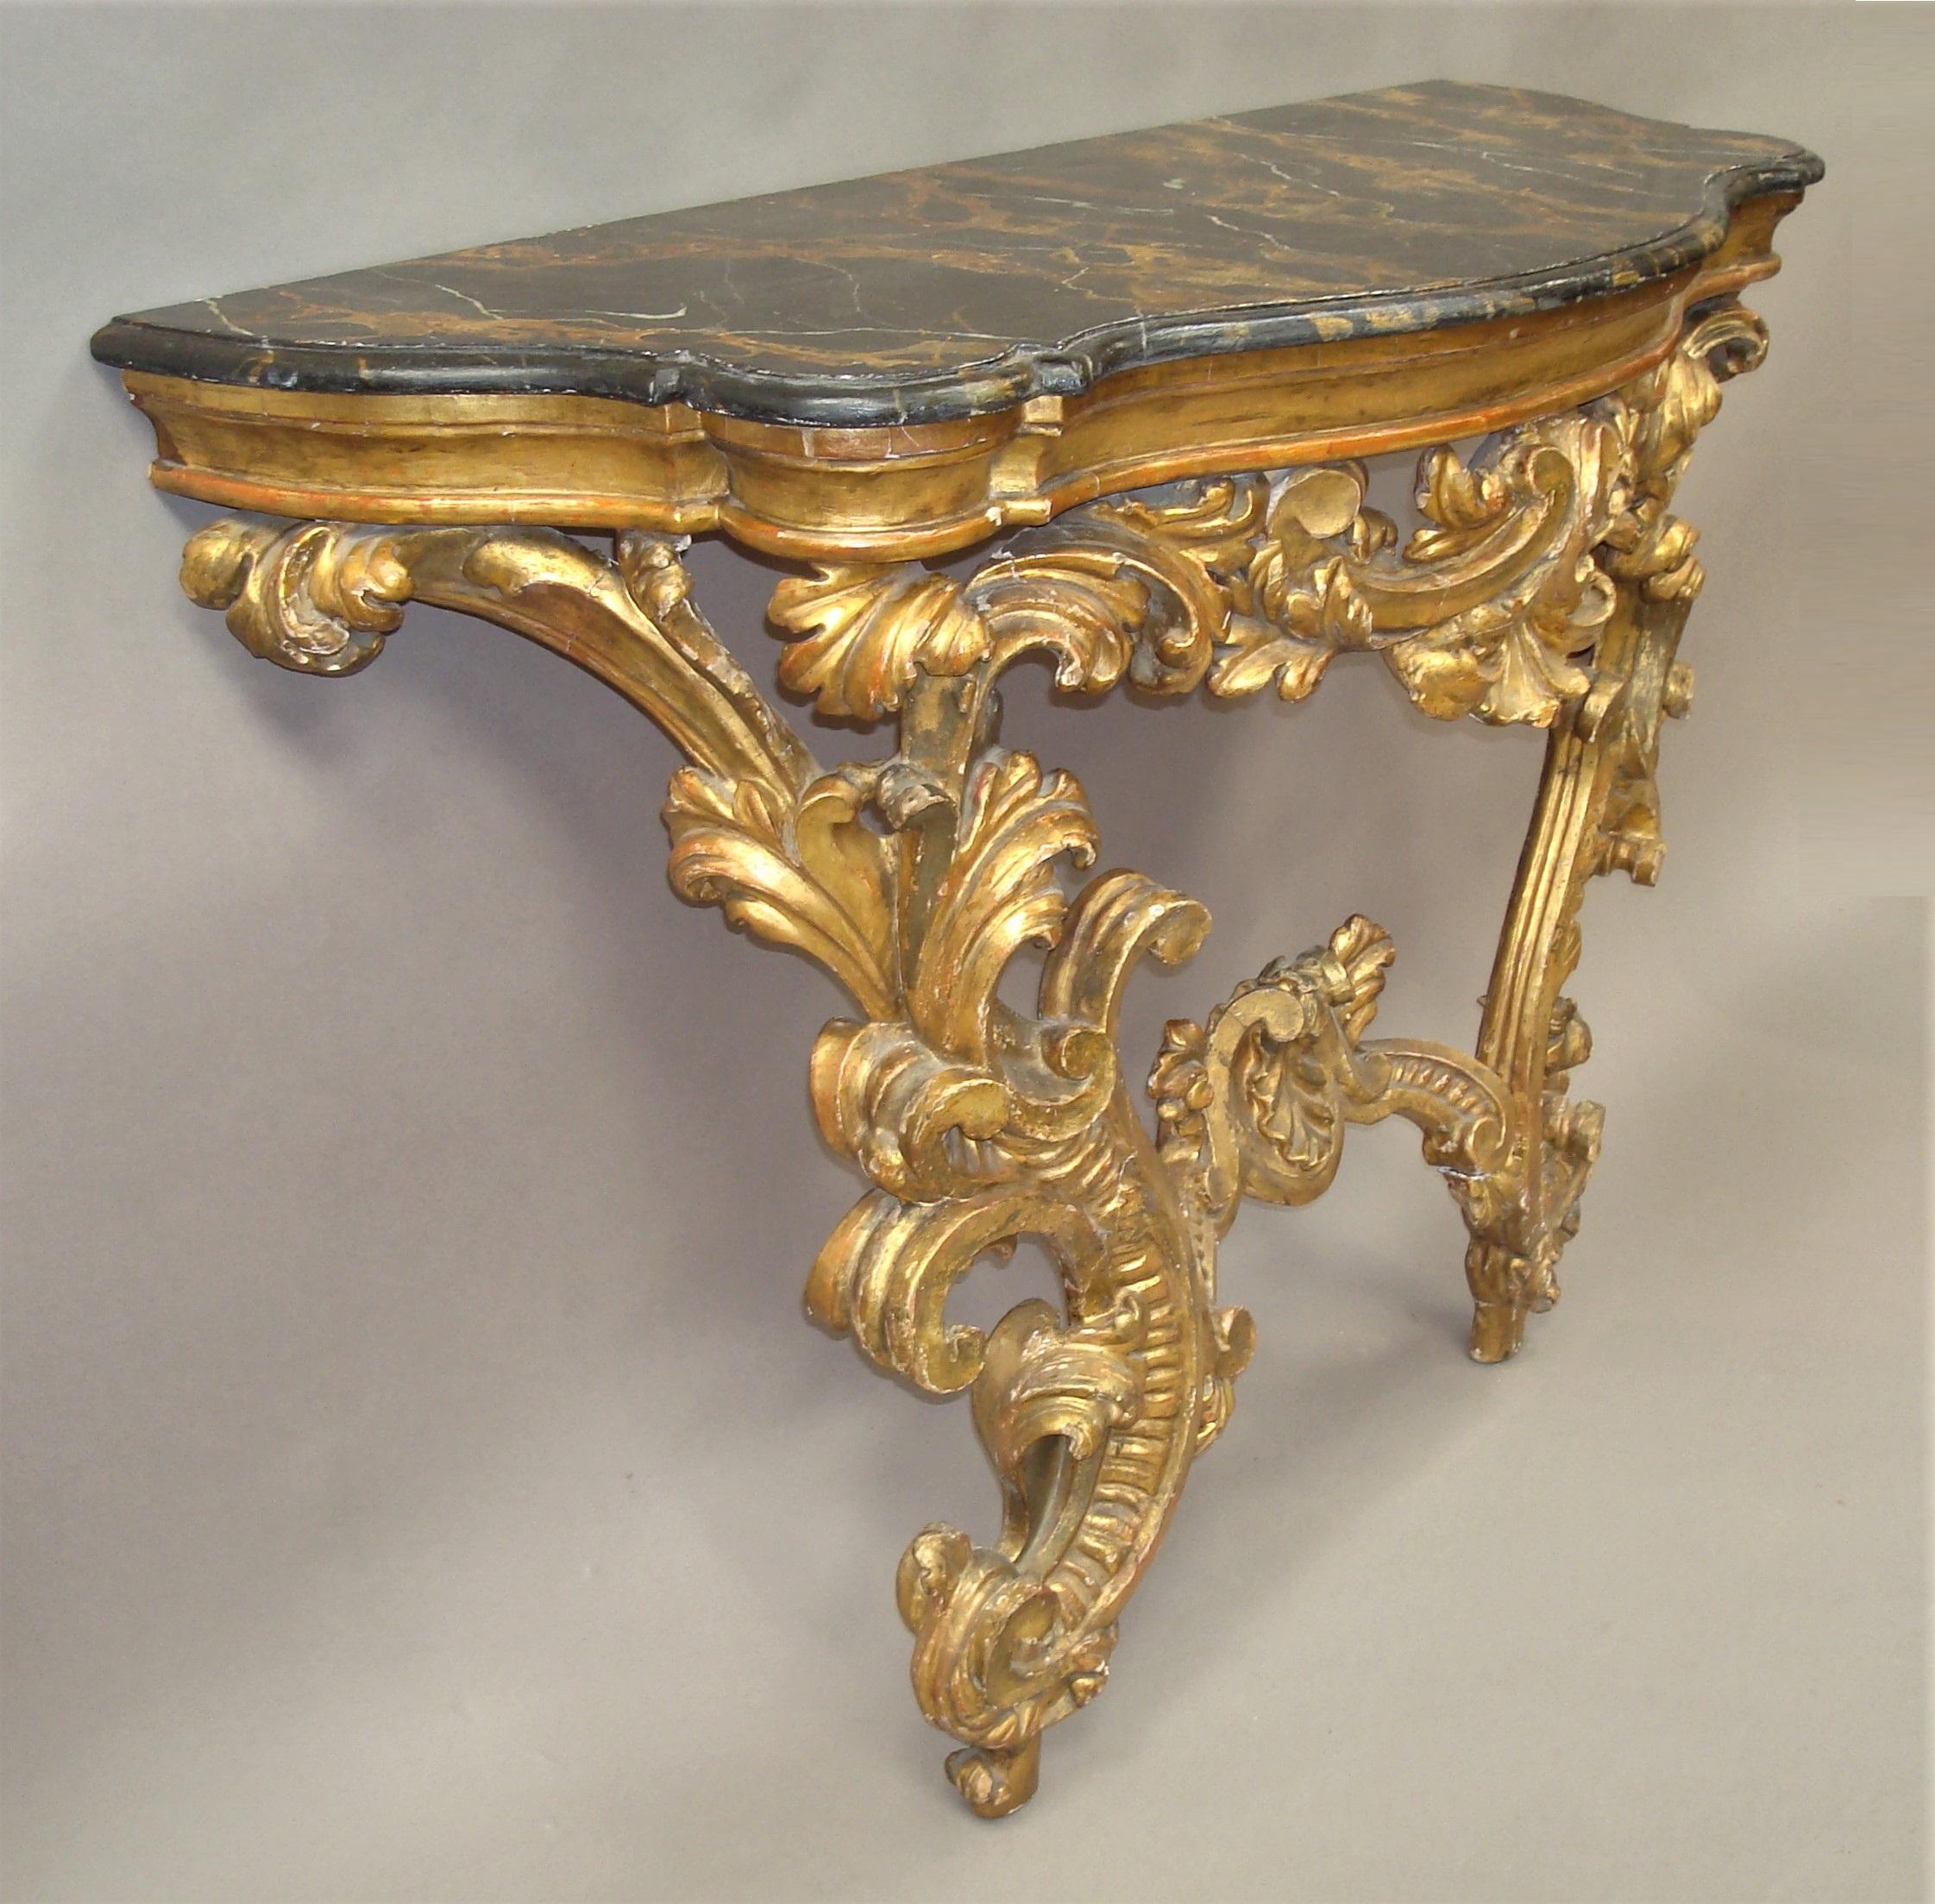 18th Century Venetian Rococo Giltwood Console Table For Sale 3